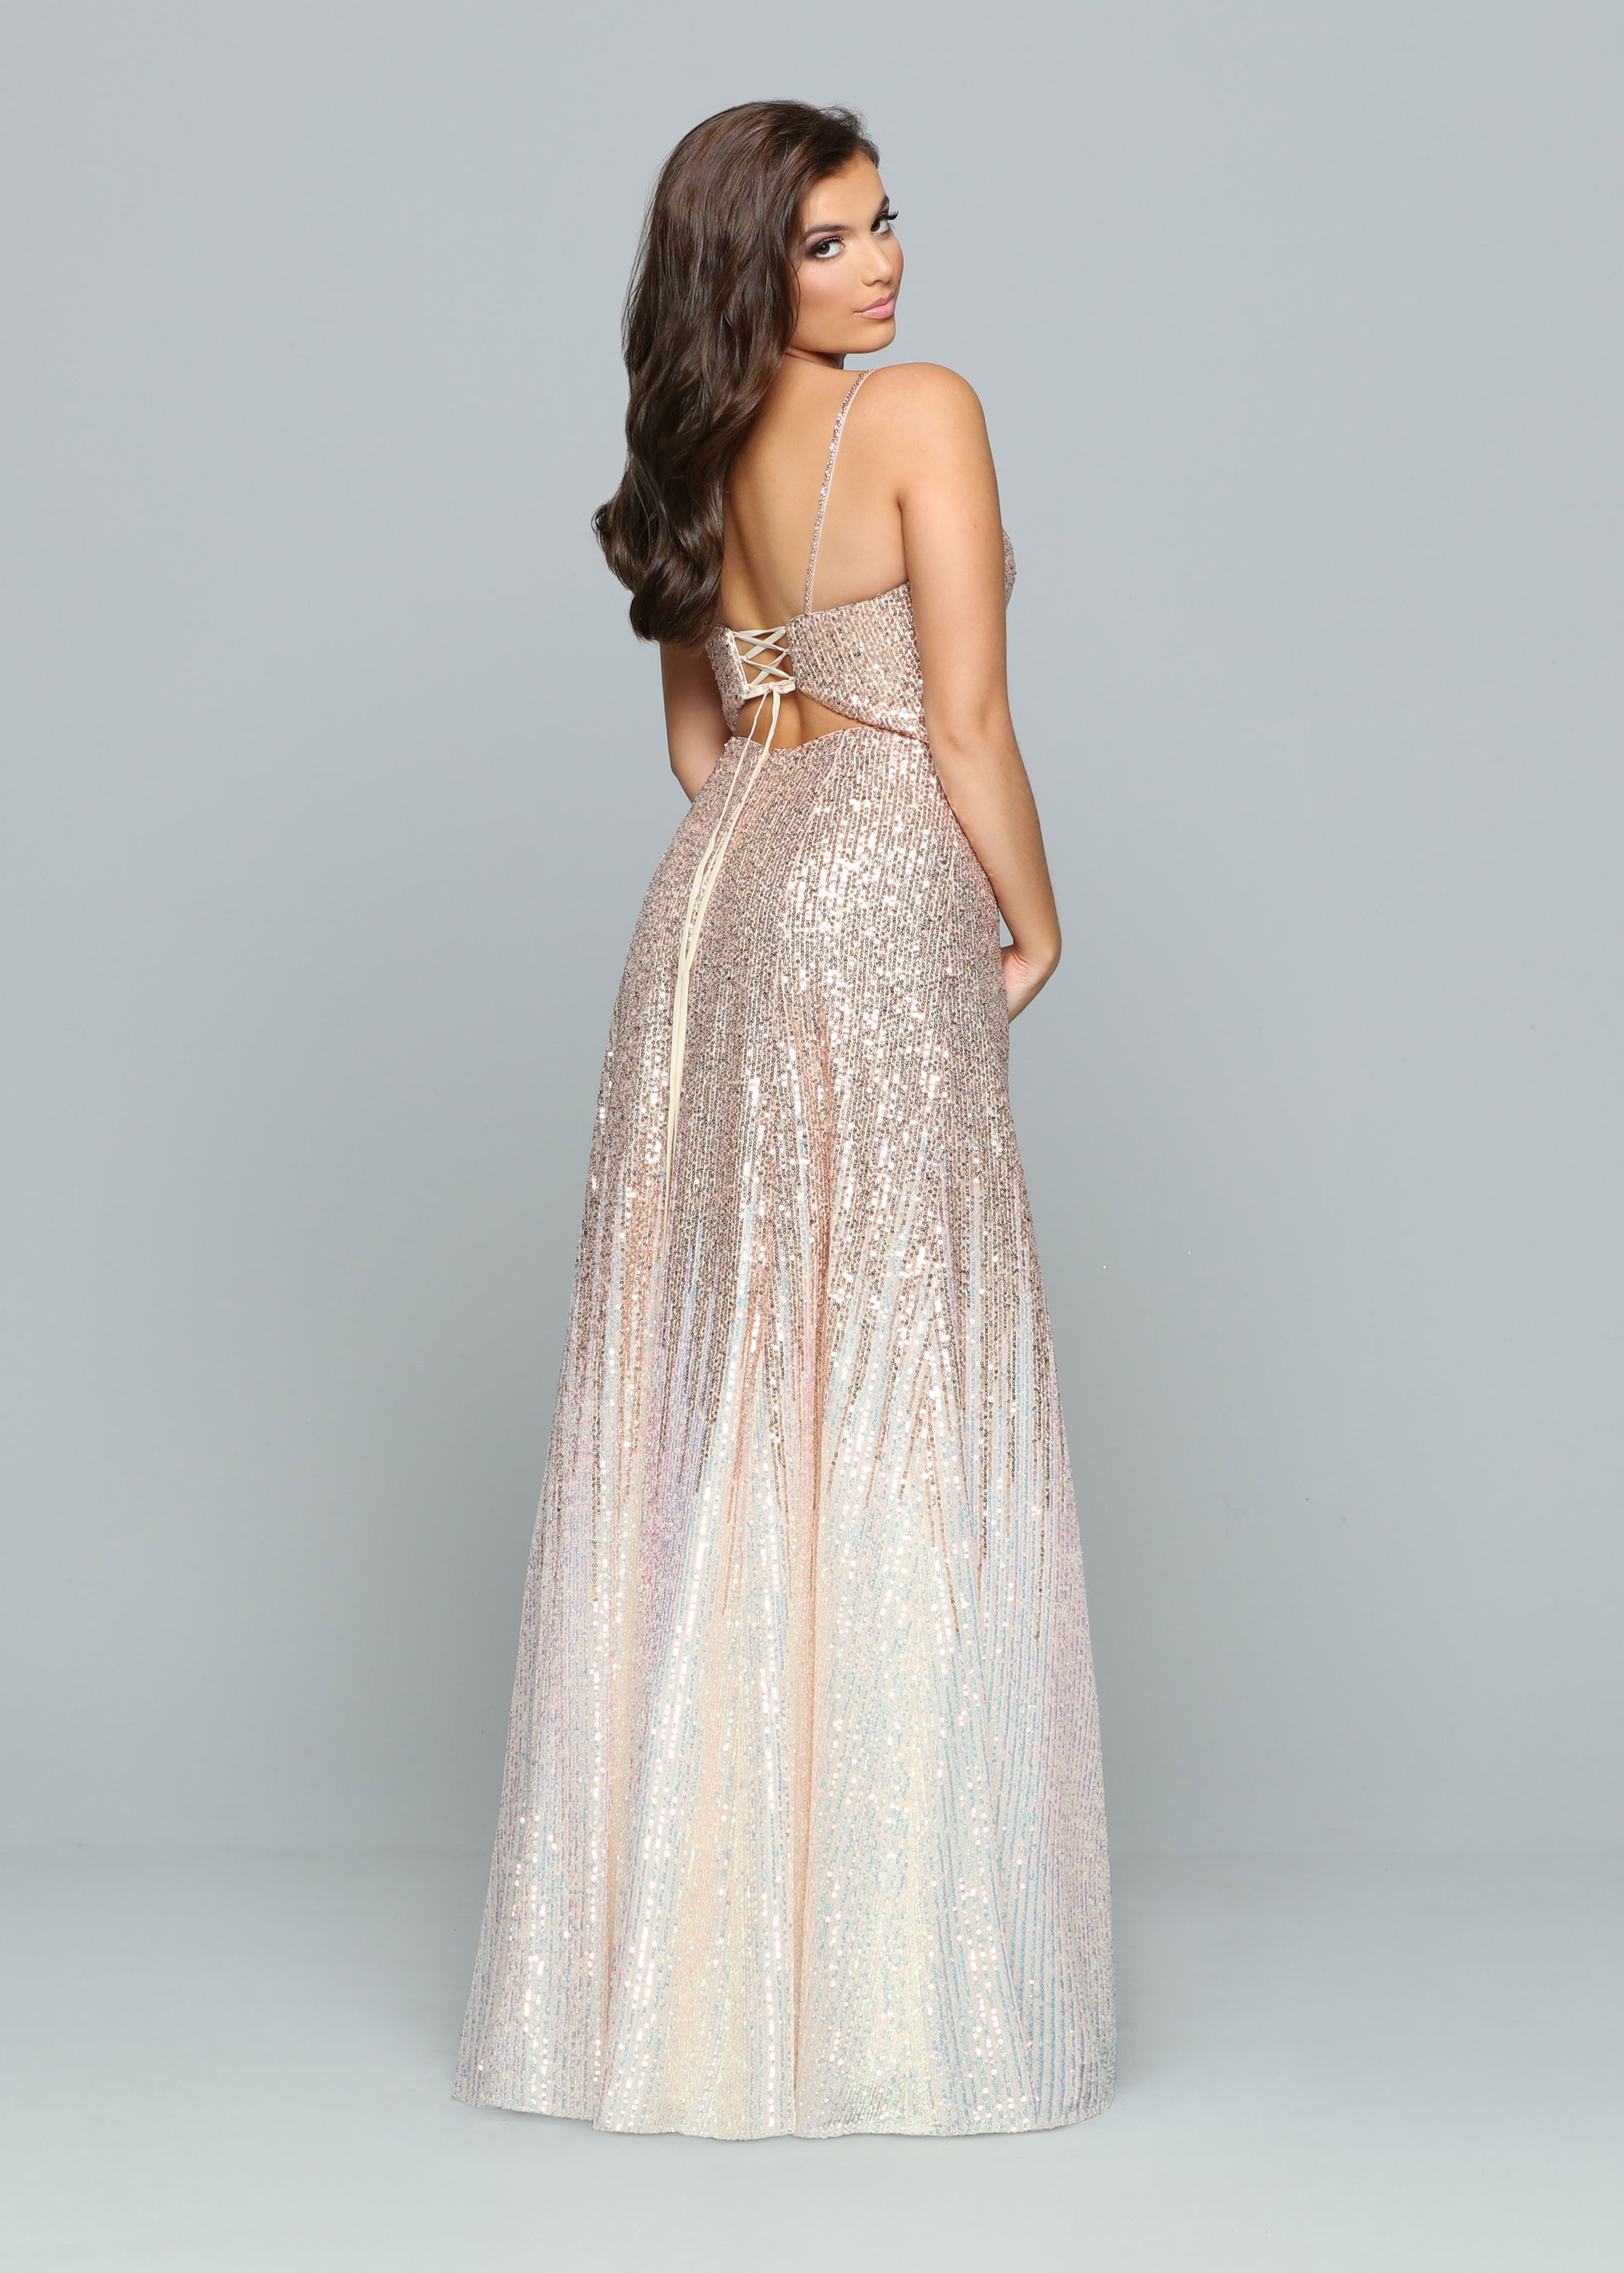 Image showing back view of style #72192